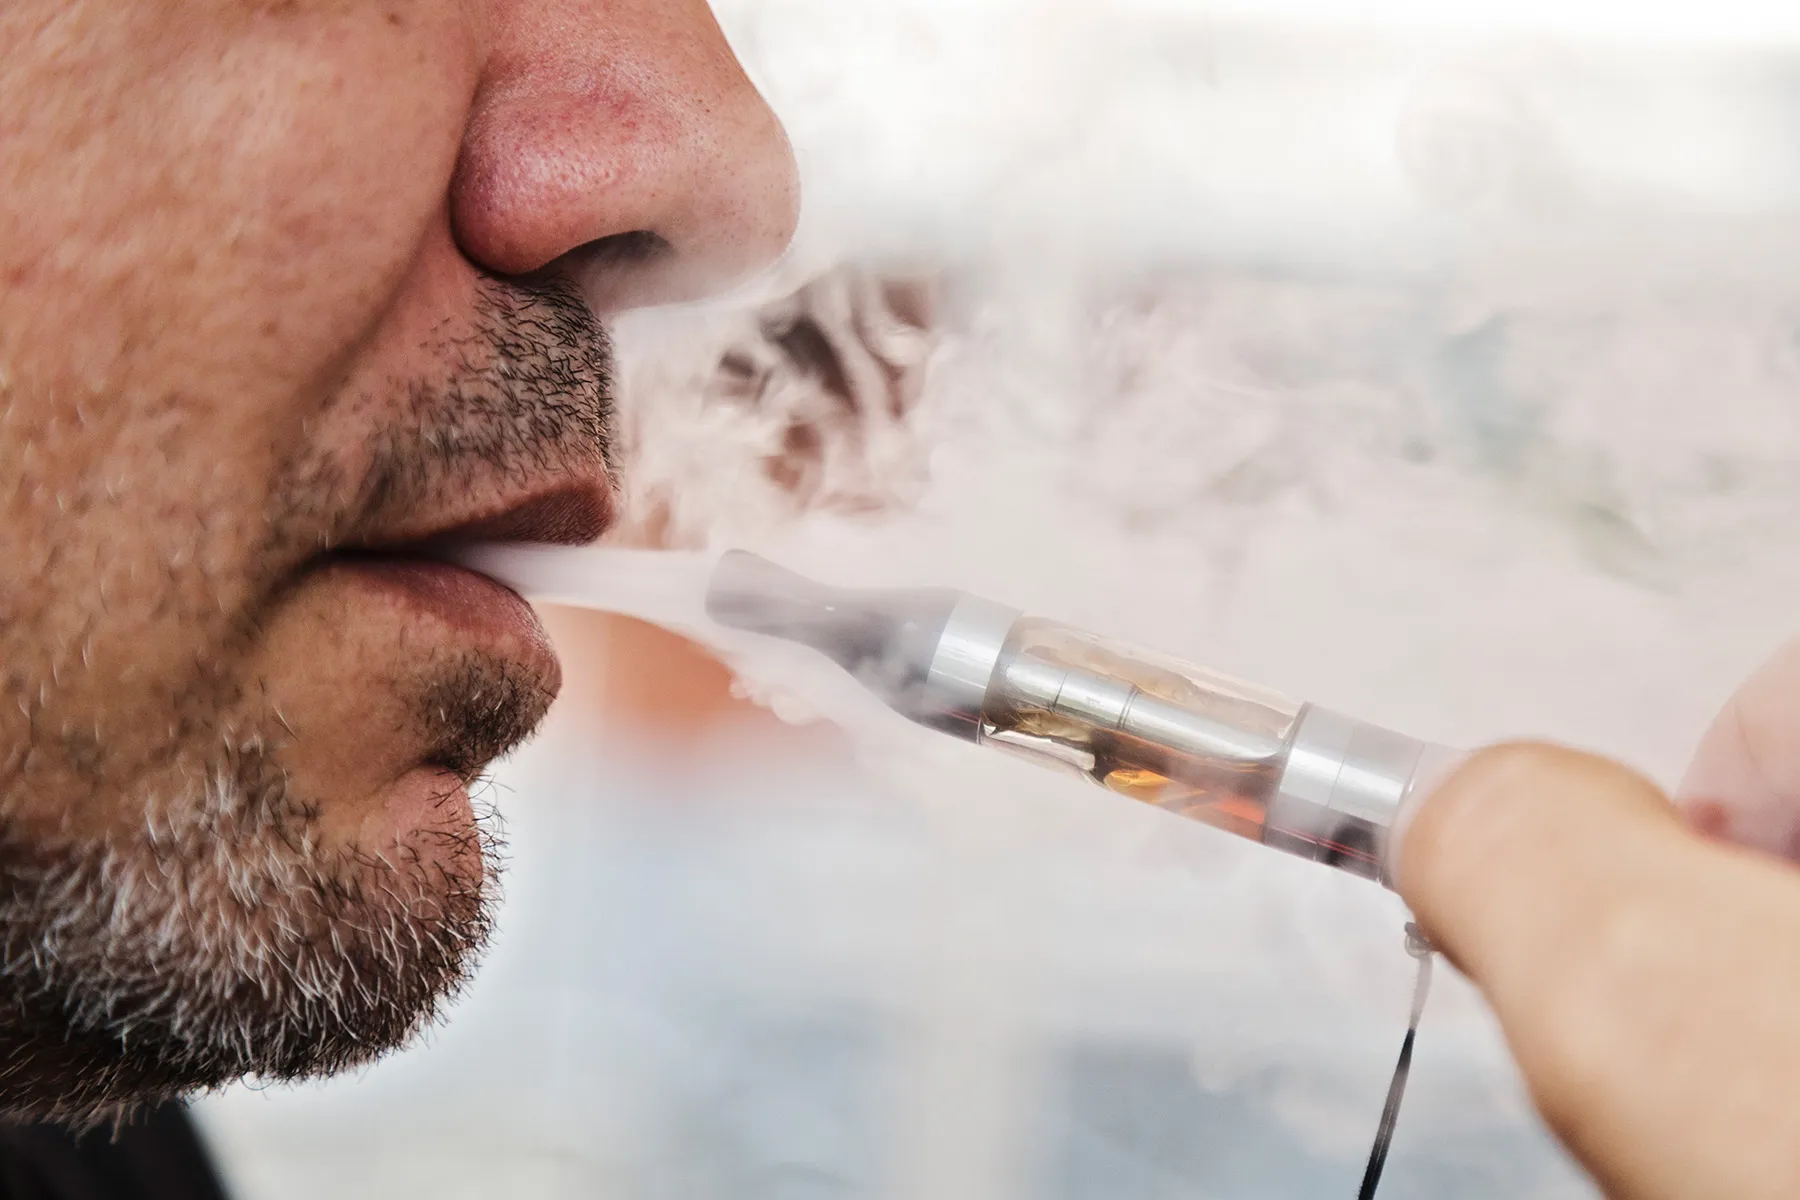 Vaping May Raise Risk for Impotence